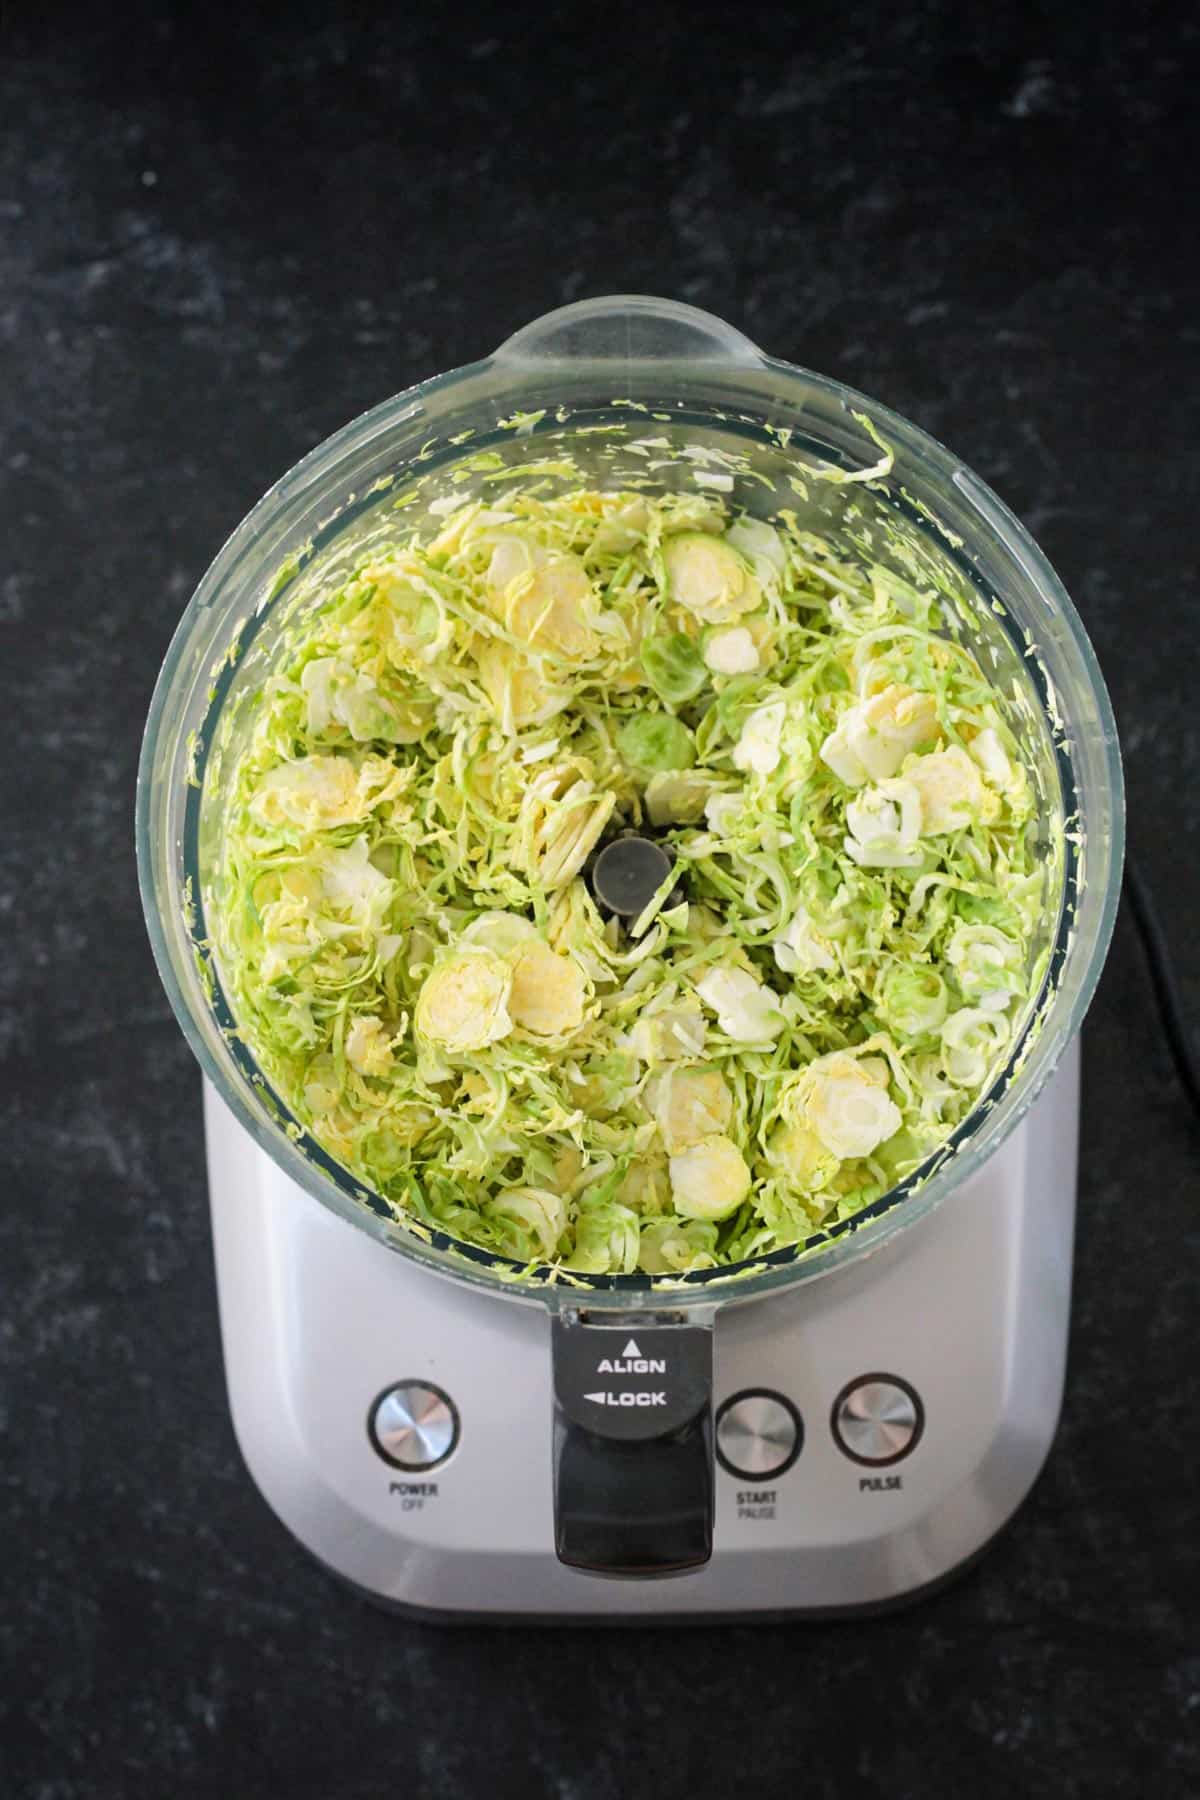 Shaved brussels sprouts in a food processor.